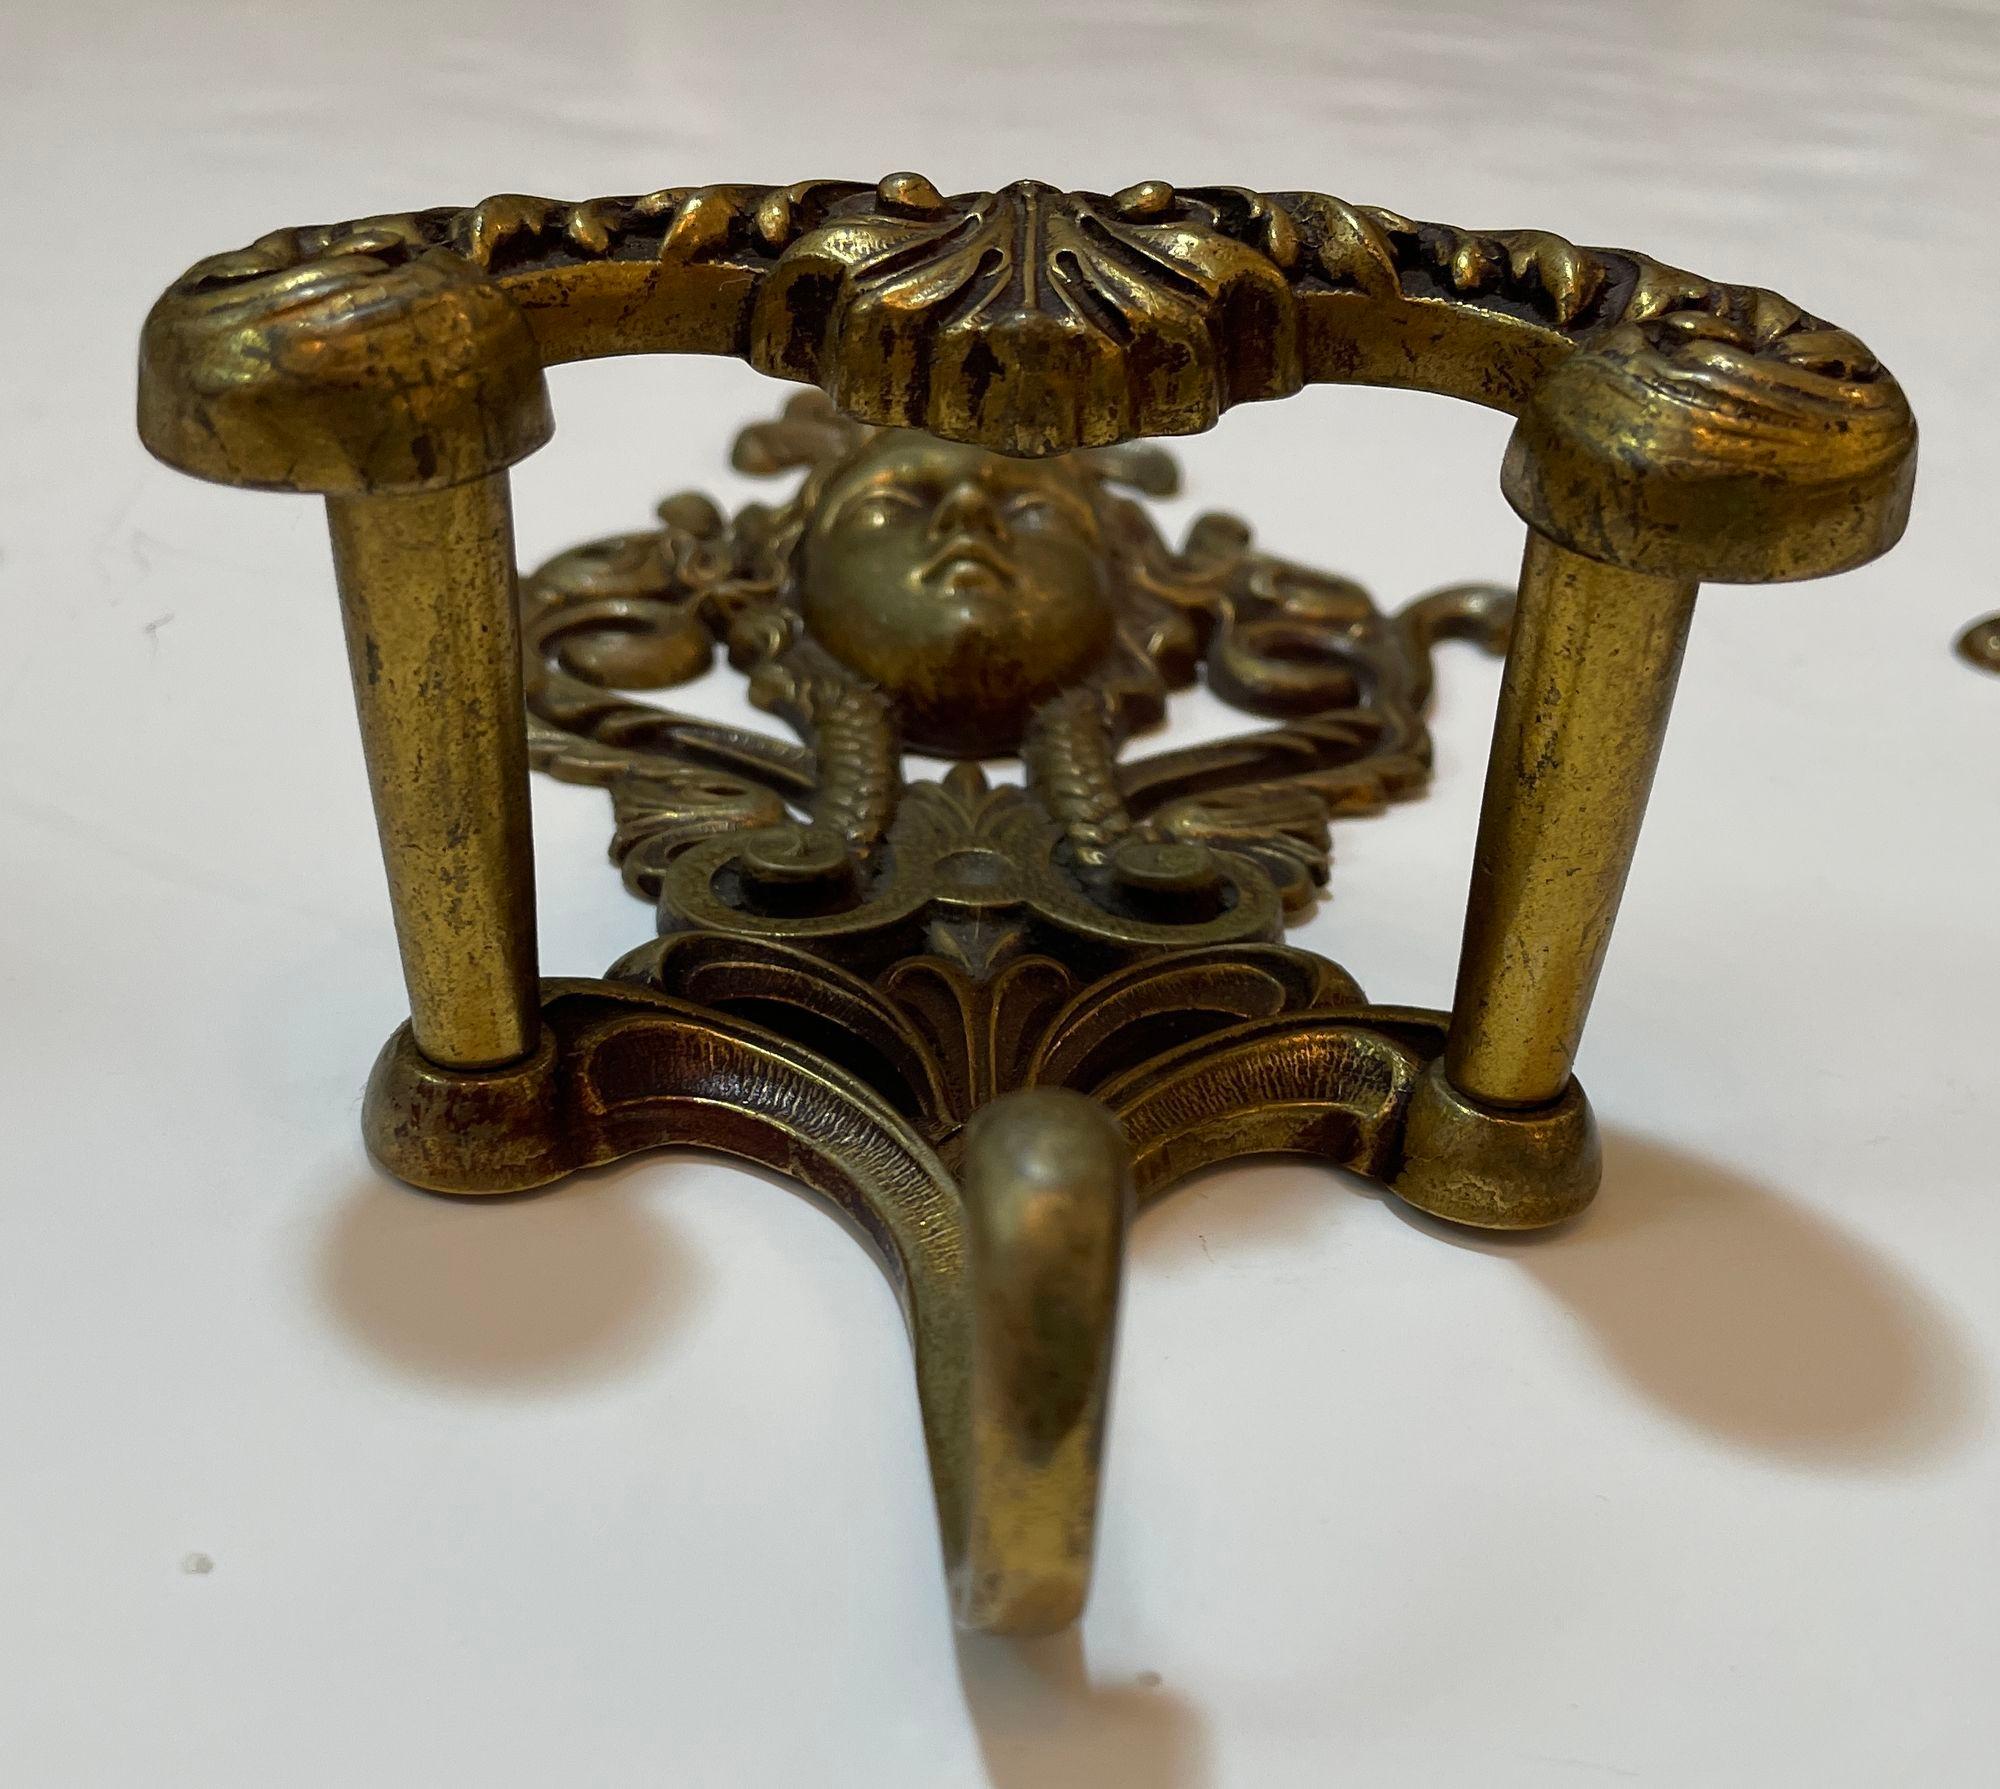 Antique Ornate Italian Figural Architectural Cast Brass Wall Hook Decor Set of 3 In Good Condition For Sale In North Hollywood, CA